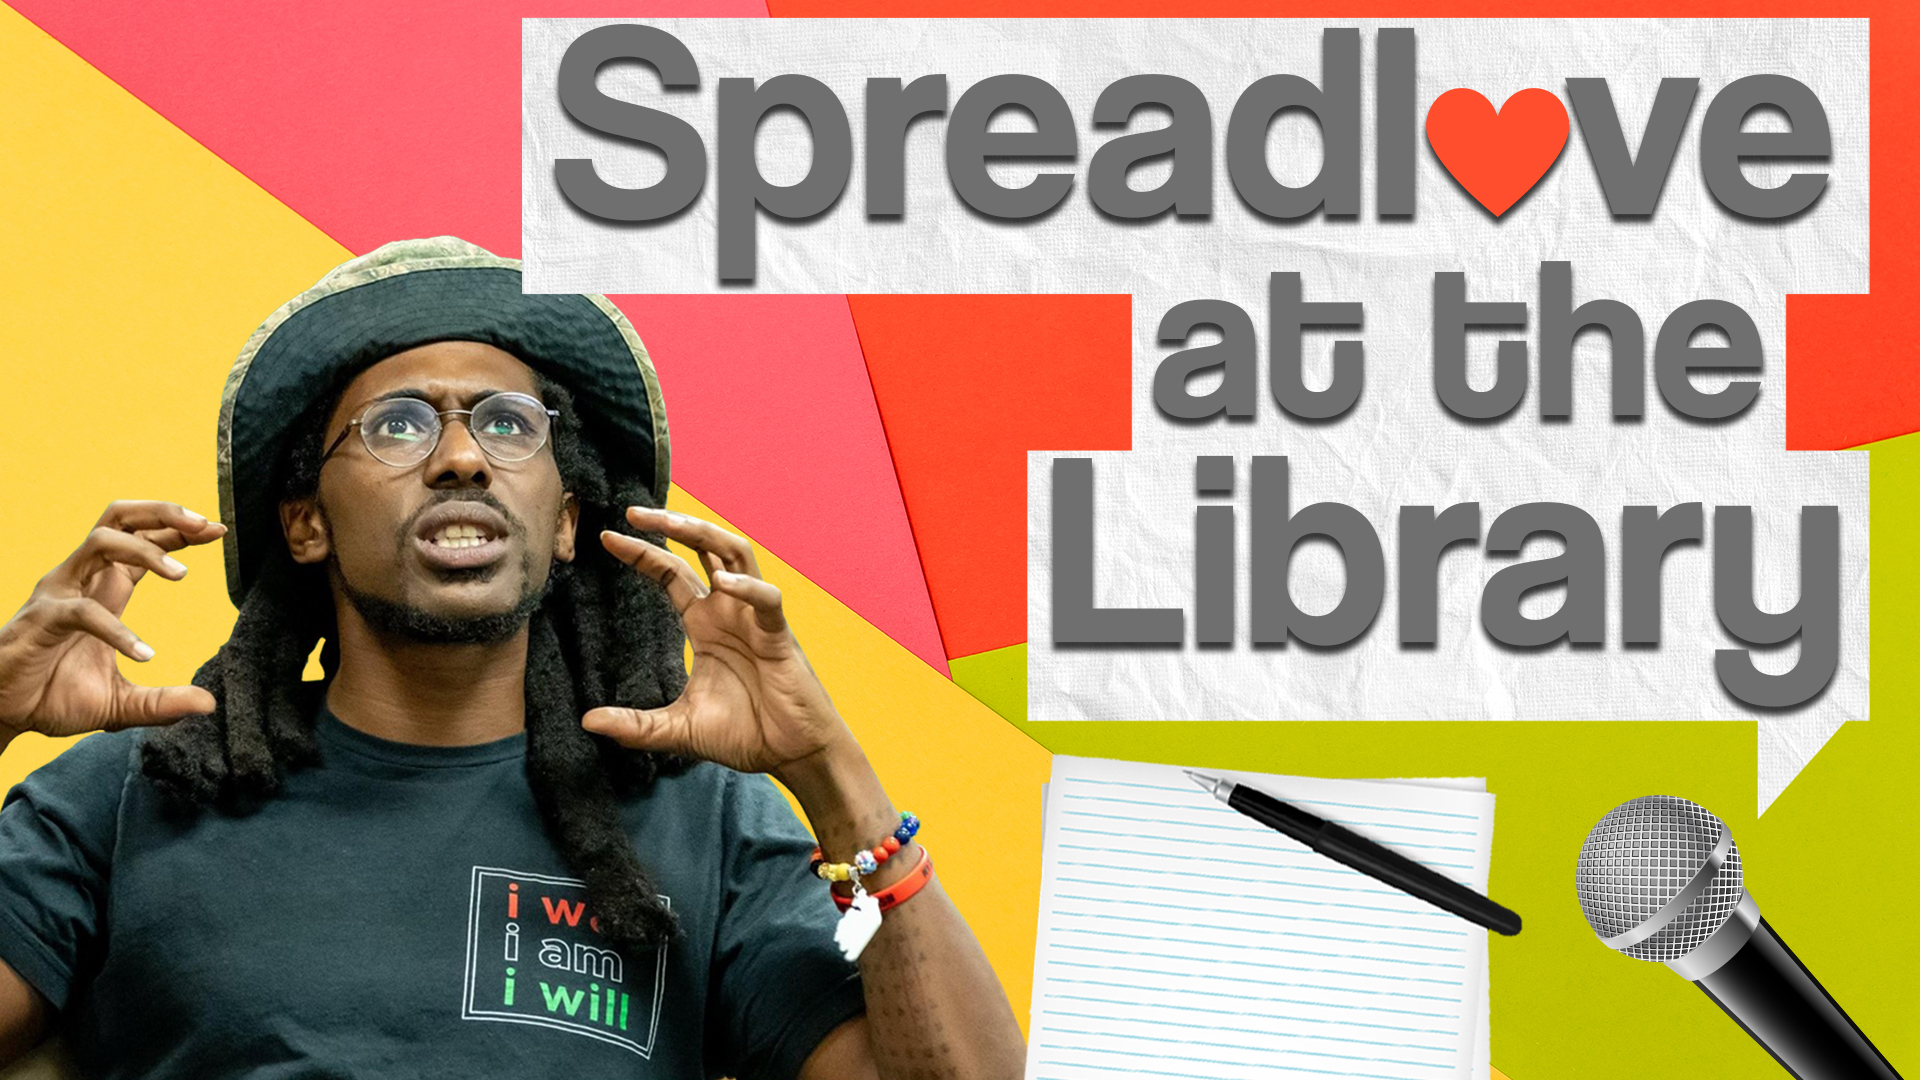 Image reads "Spreadlove at the Library" against a colorful paper background. A piece of paper with a pen and a microphone are under the title.